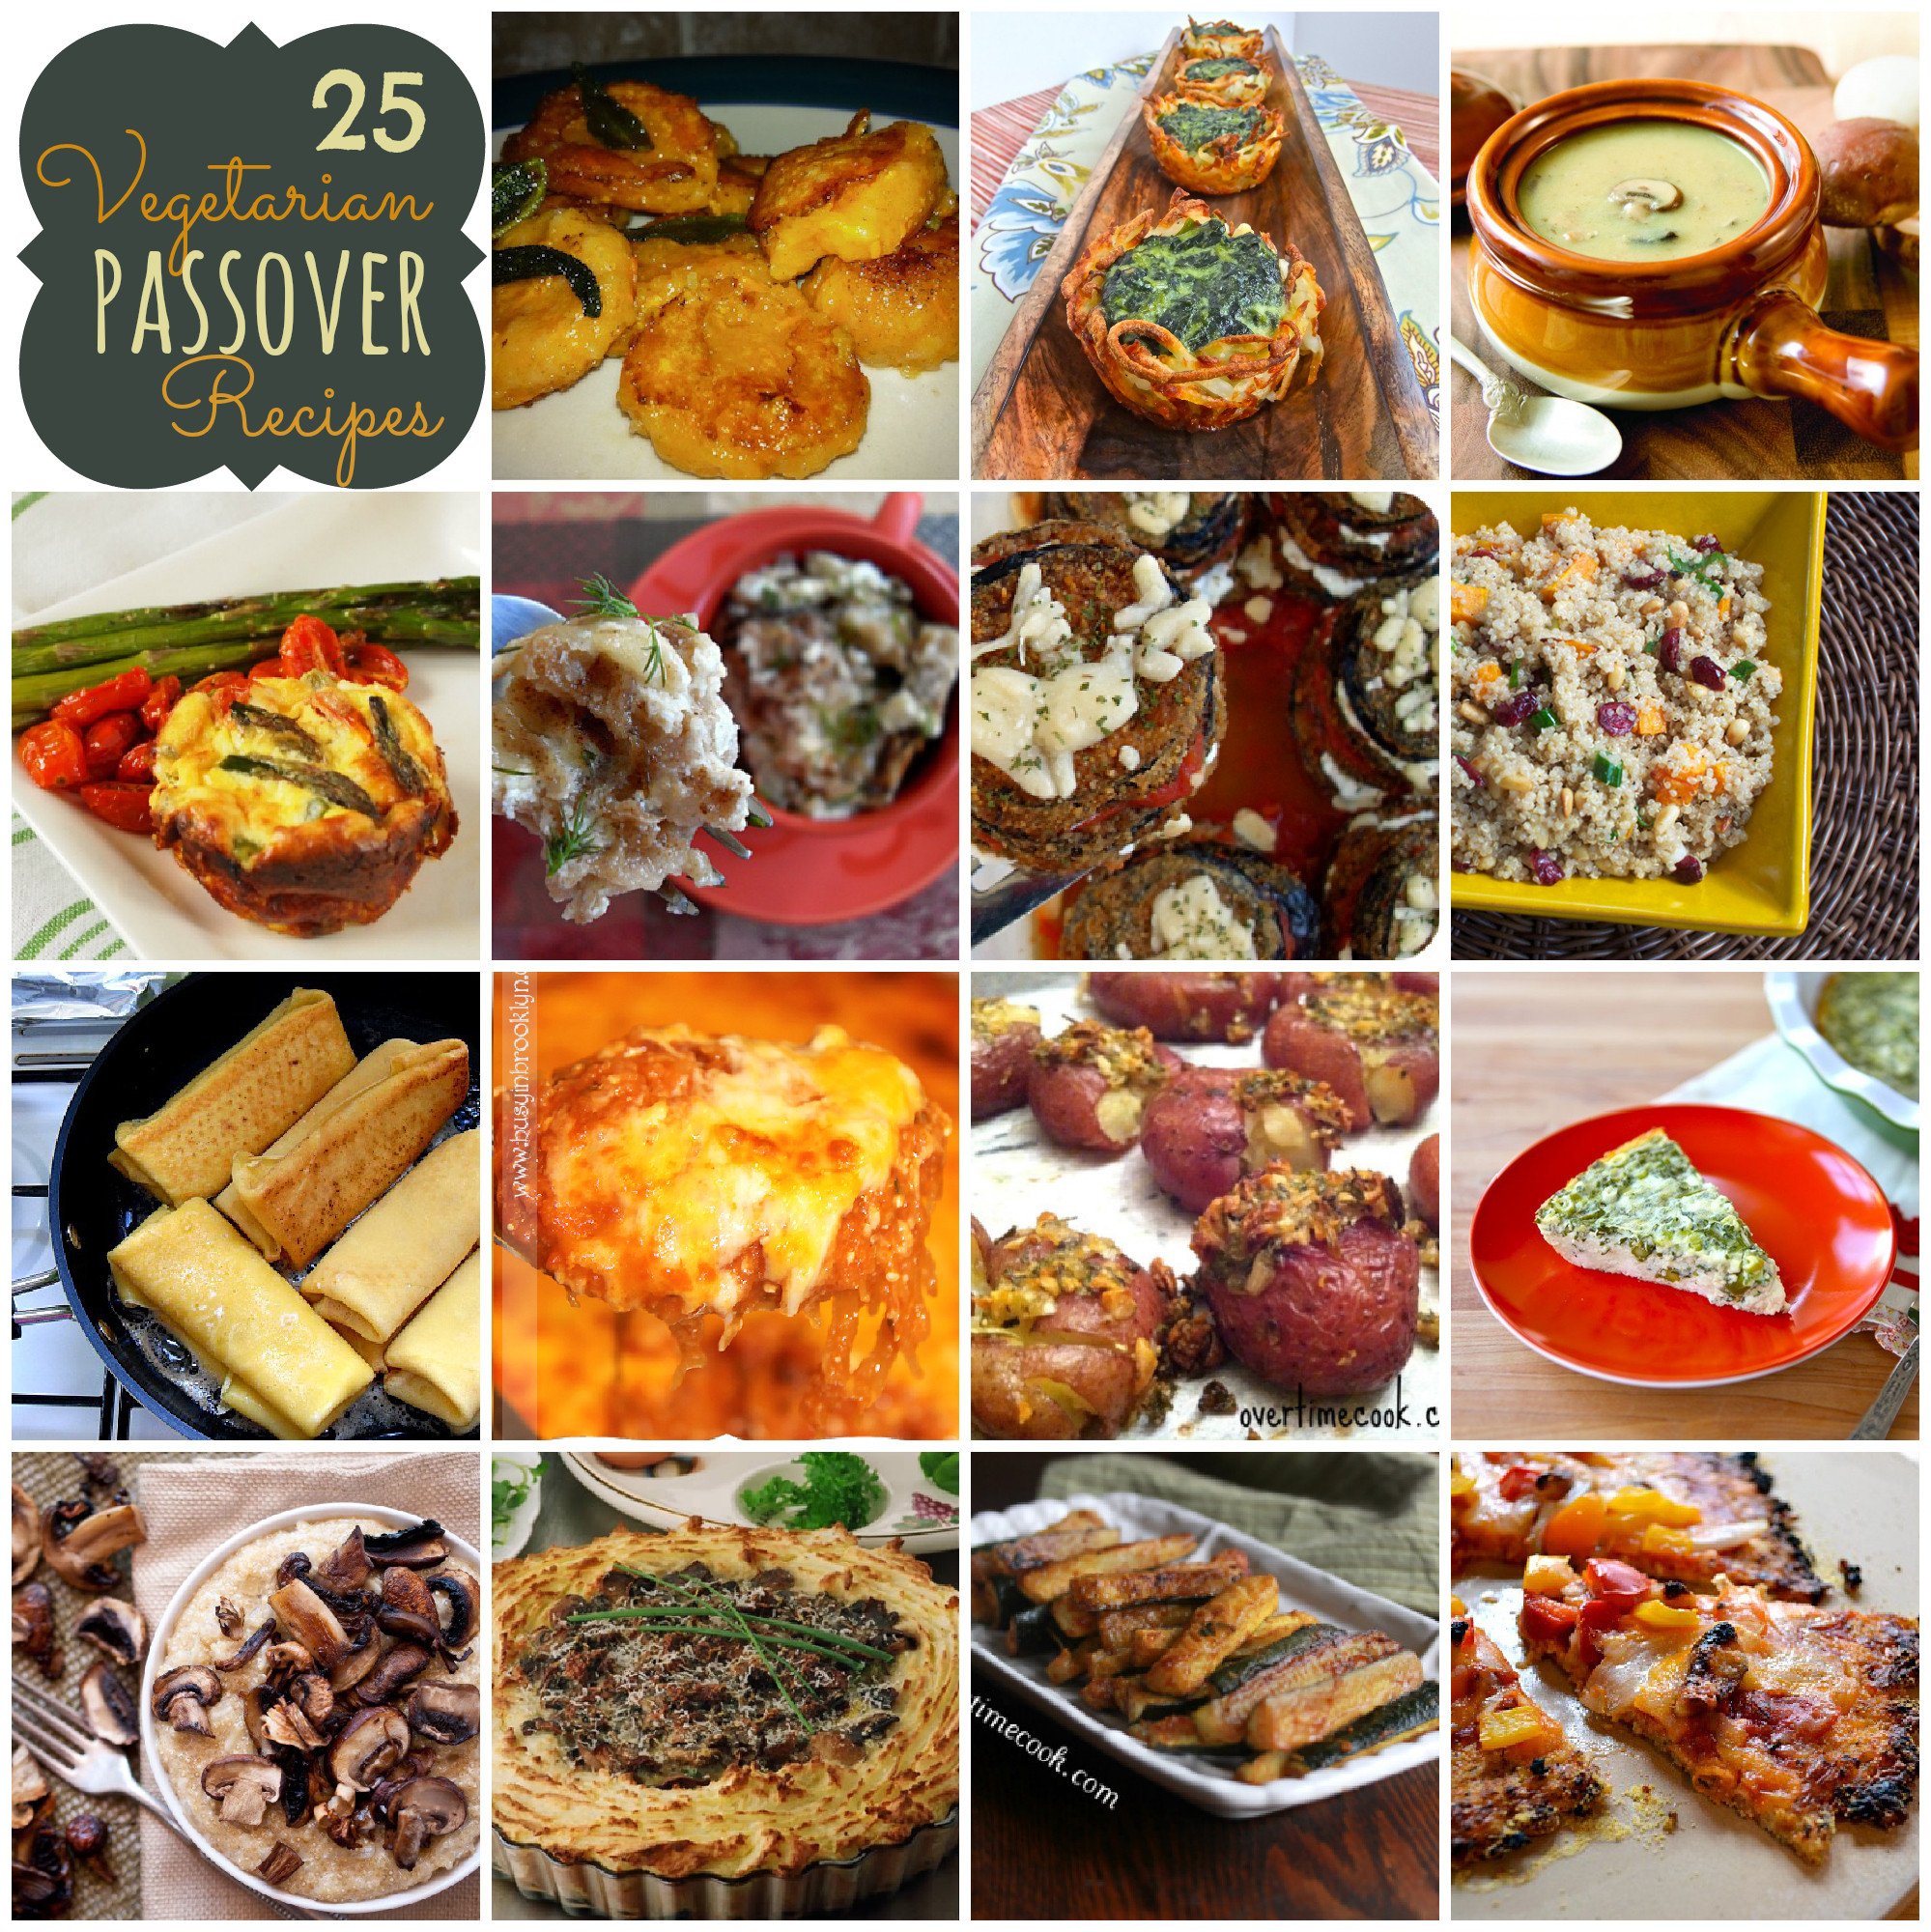 Passover Lunch Ideas
 25 Ve arian Passover Recipes